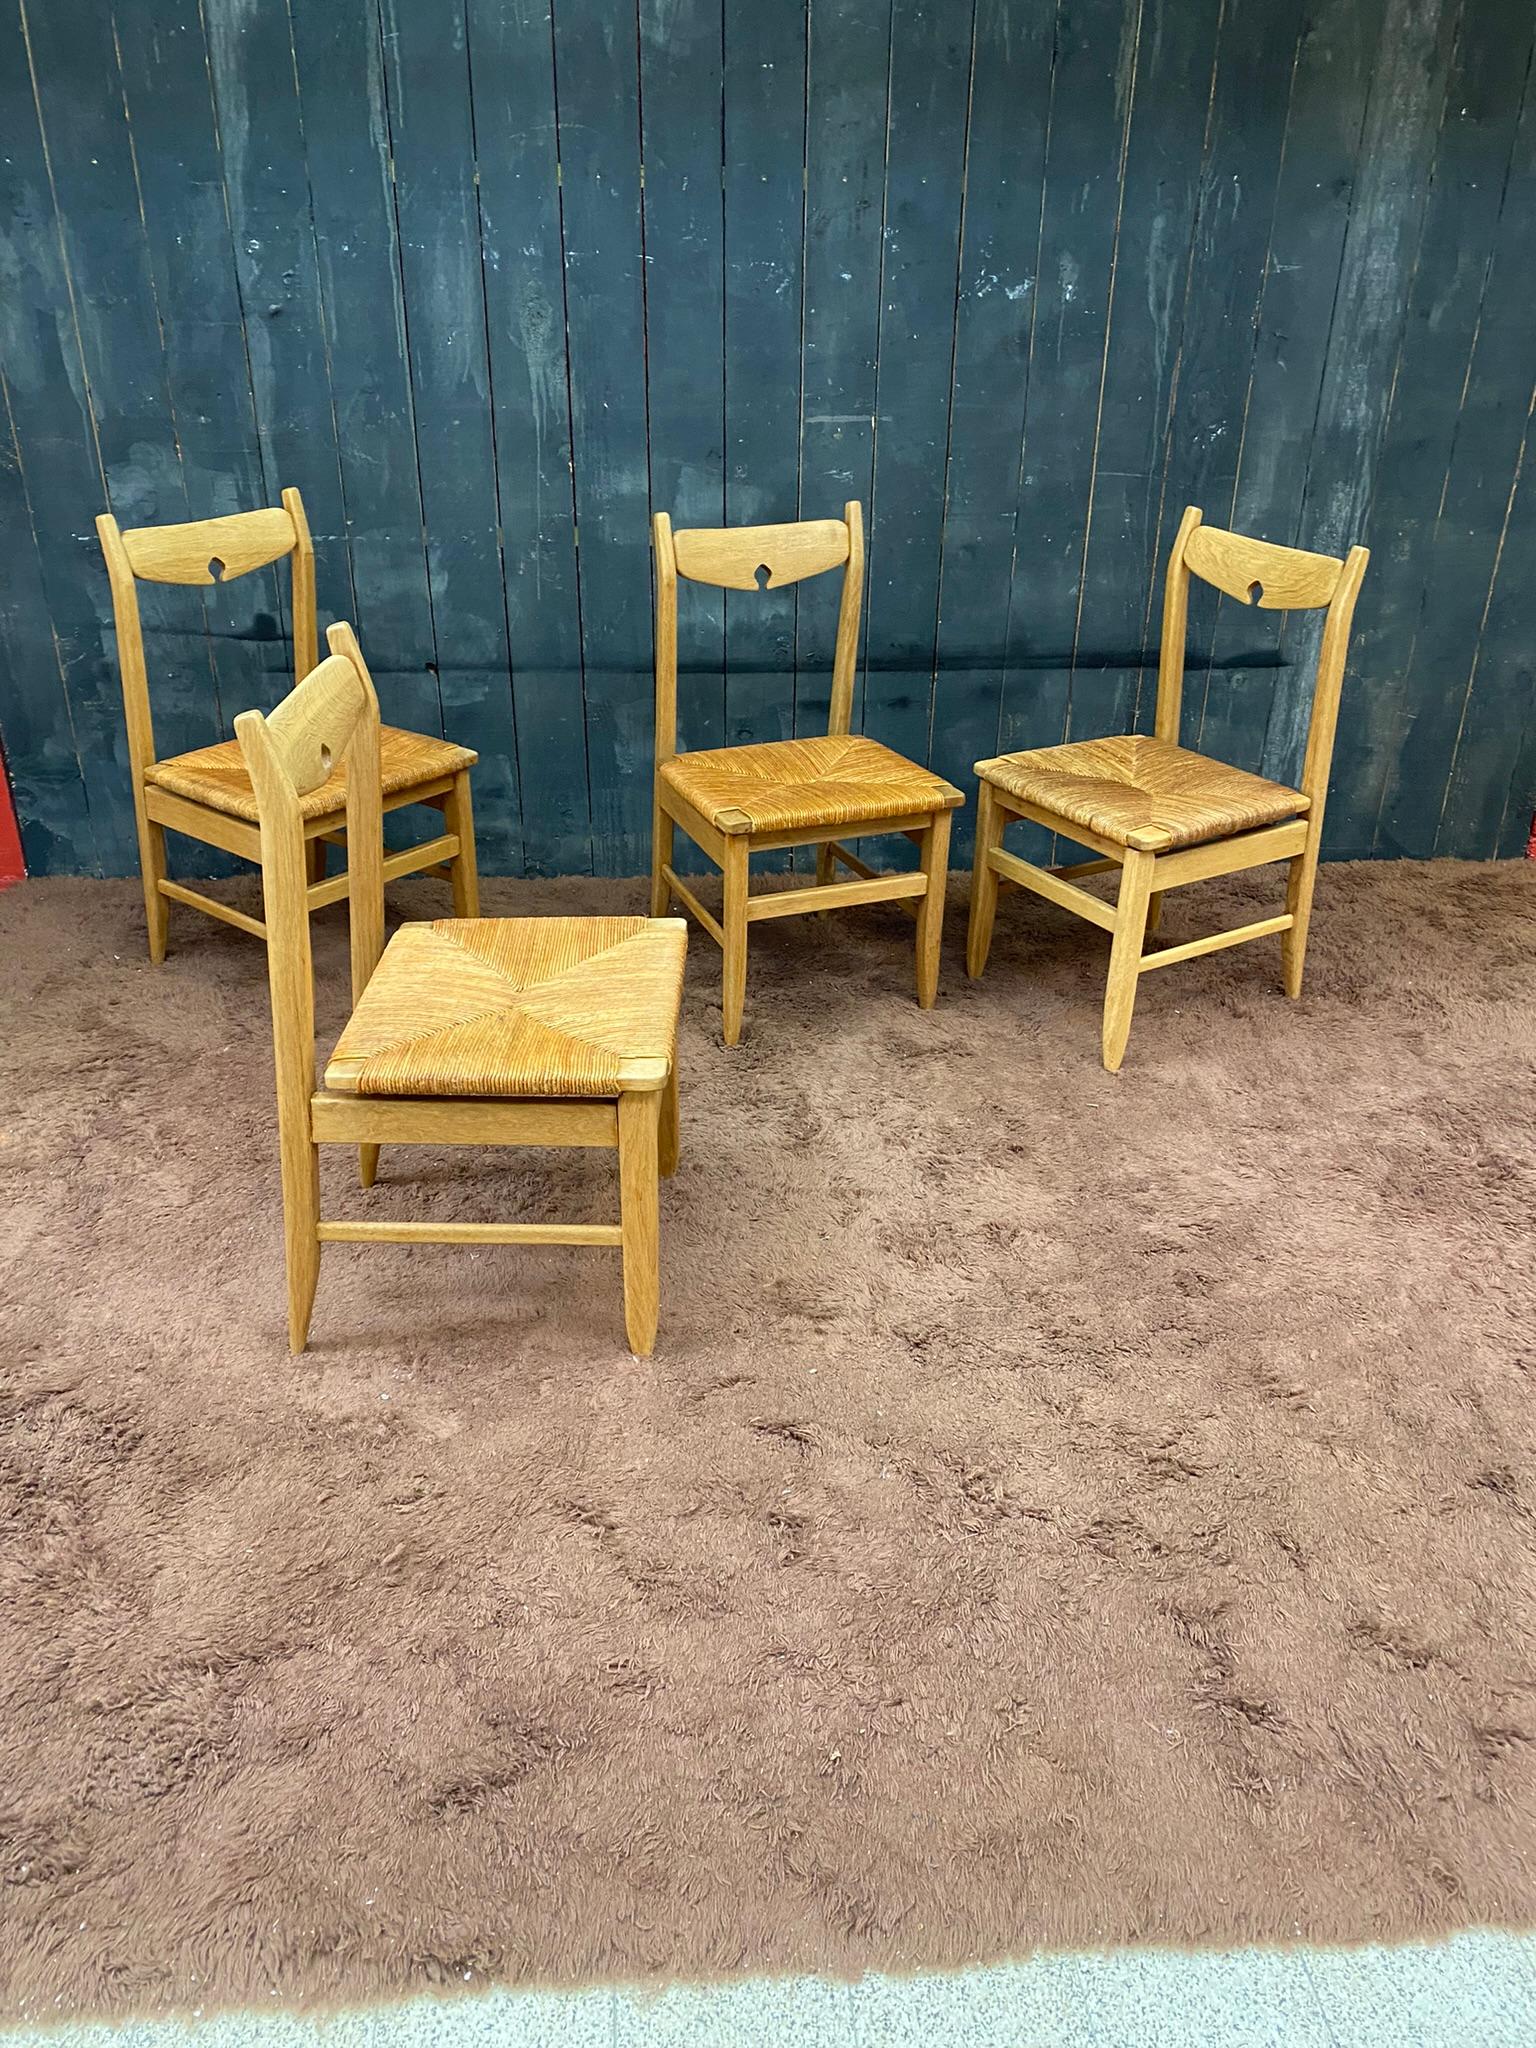 Guillerme et Chambron SET OF 4 chairs Edition Votre Maison, circa 1970.
Wood and straws are in good condition.